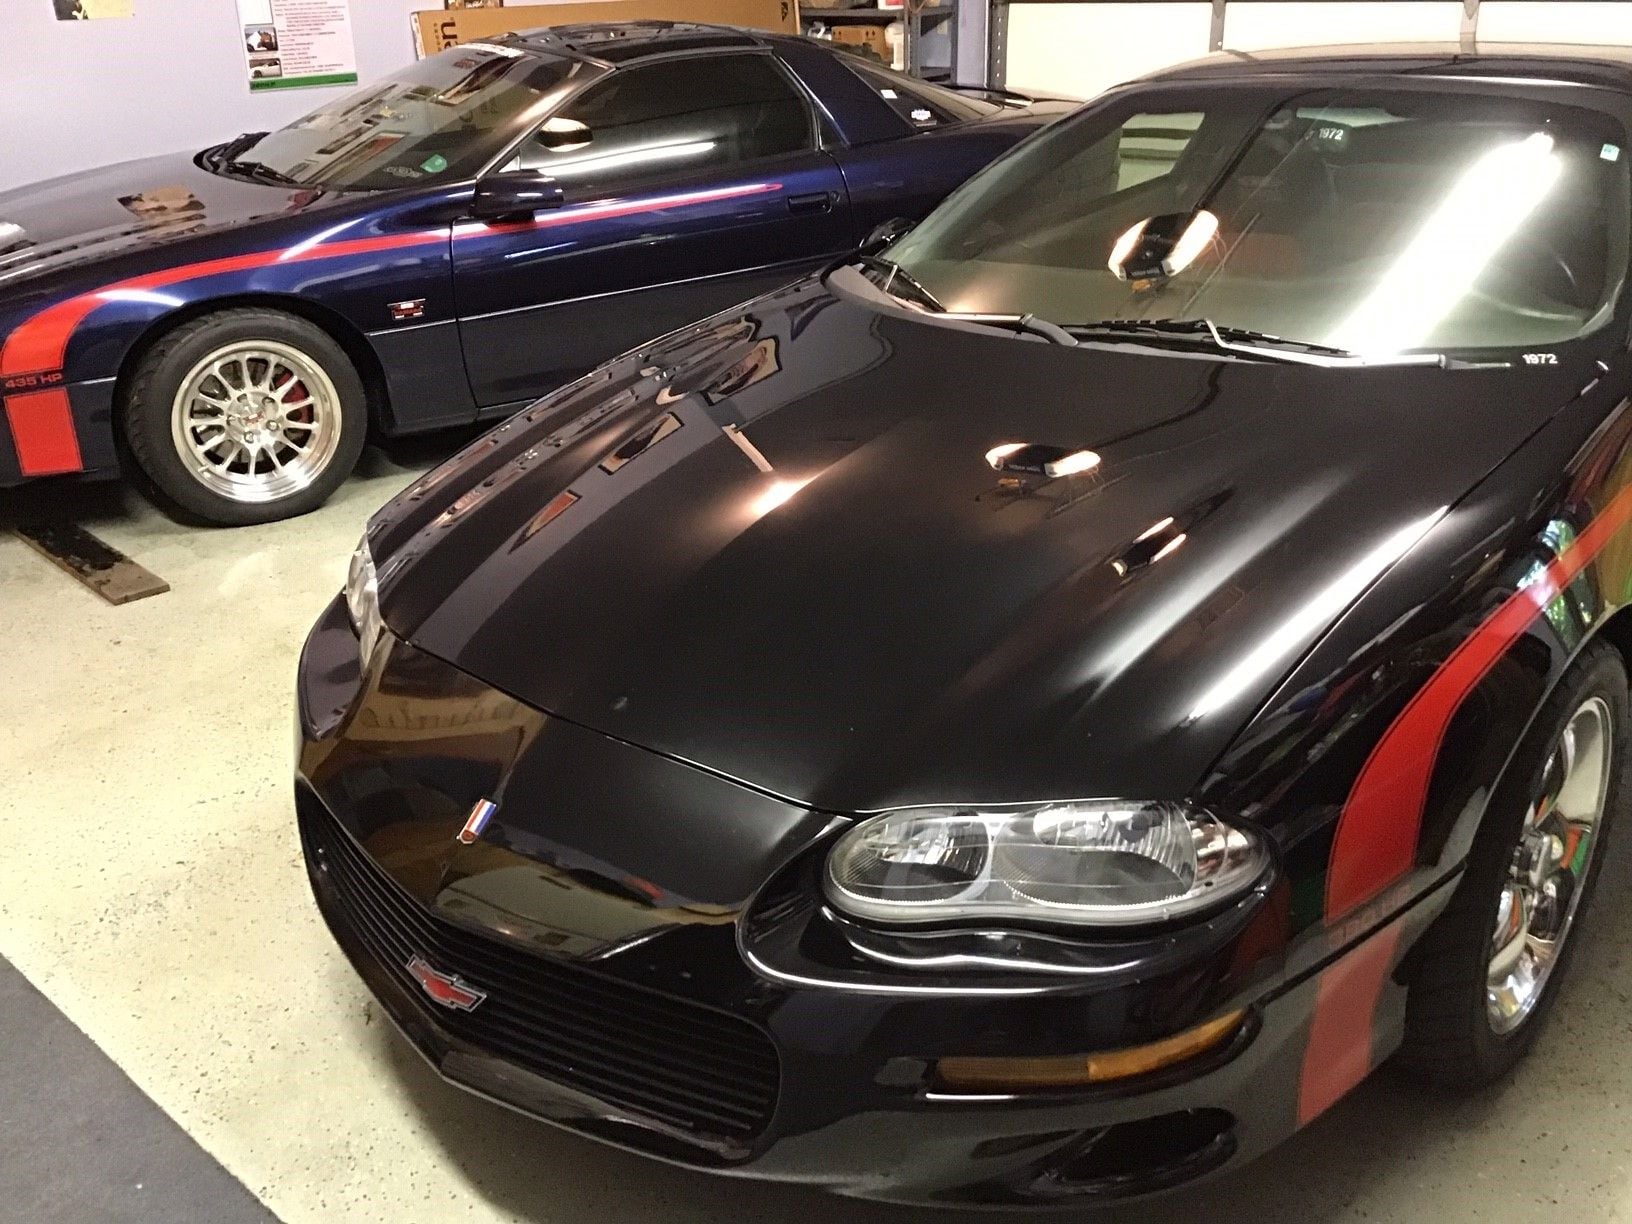 2002 Chevrolet Camaro - Gmmg hot rod edition #1972 - Used - VIN 2G1FP22G622156503 - 15,100 Miles - 8 cyl - 2WD - Manual - Coupe - Black - Balsam Lake, WI 54810, United States